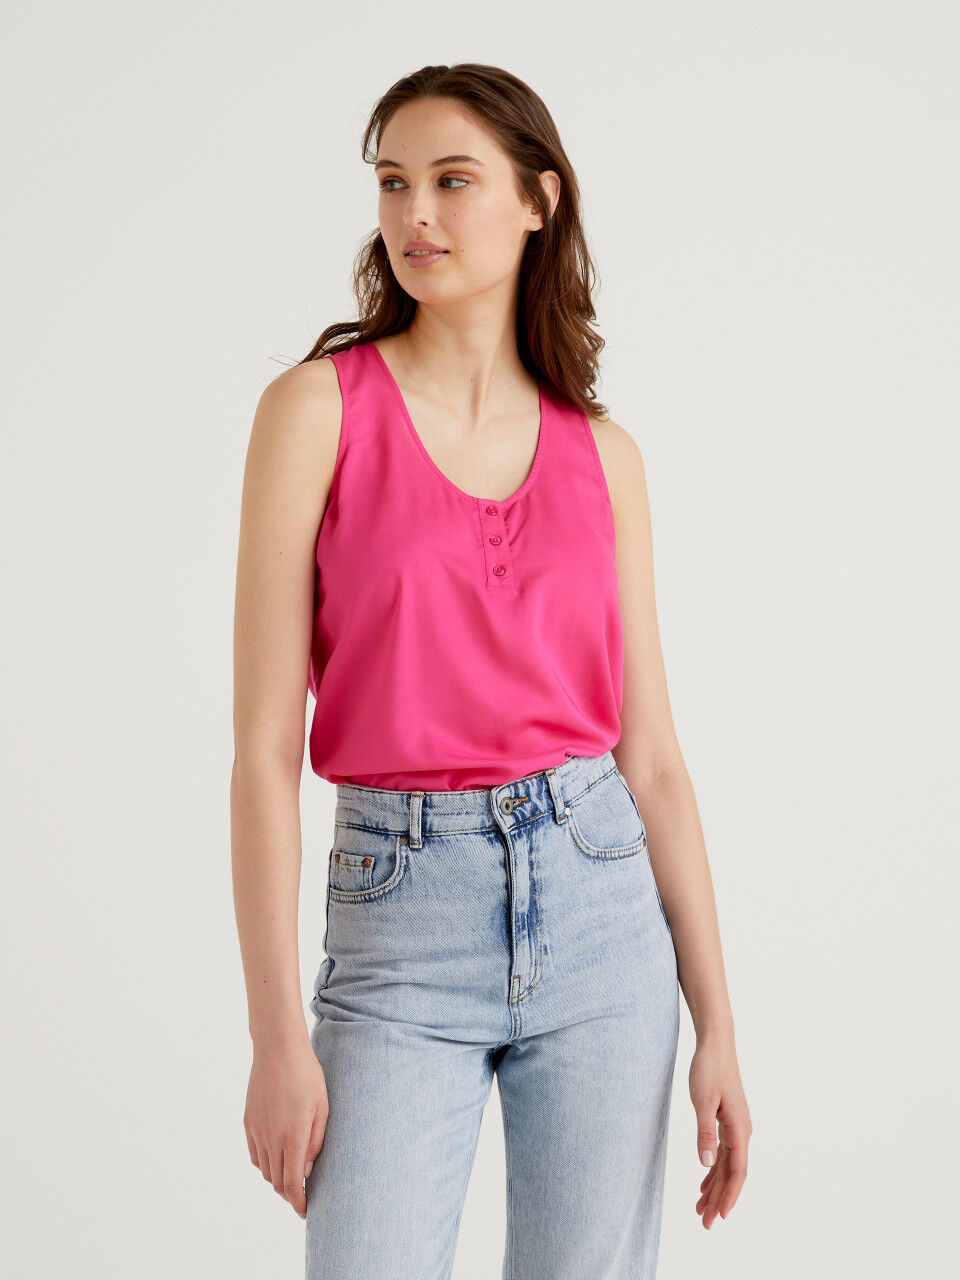 Fashion Tops Strappy Tops United Colors of Benetton Strappy Top nude-pink casual look 